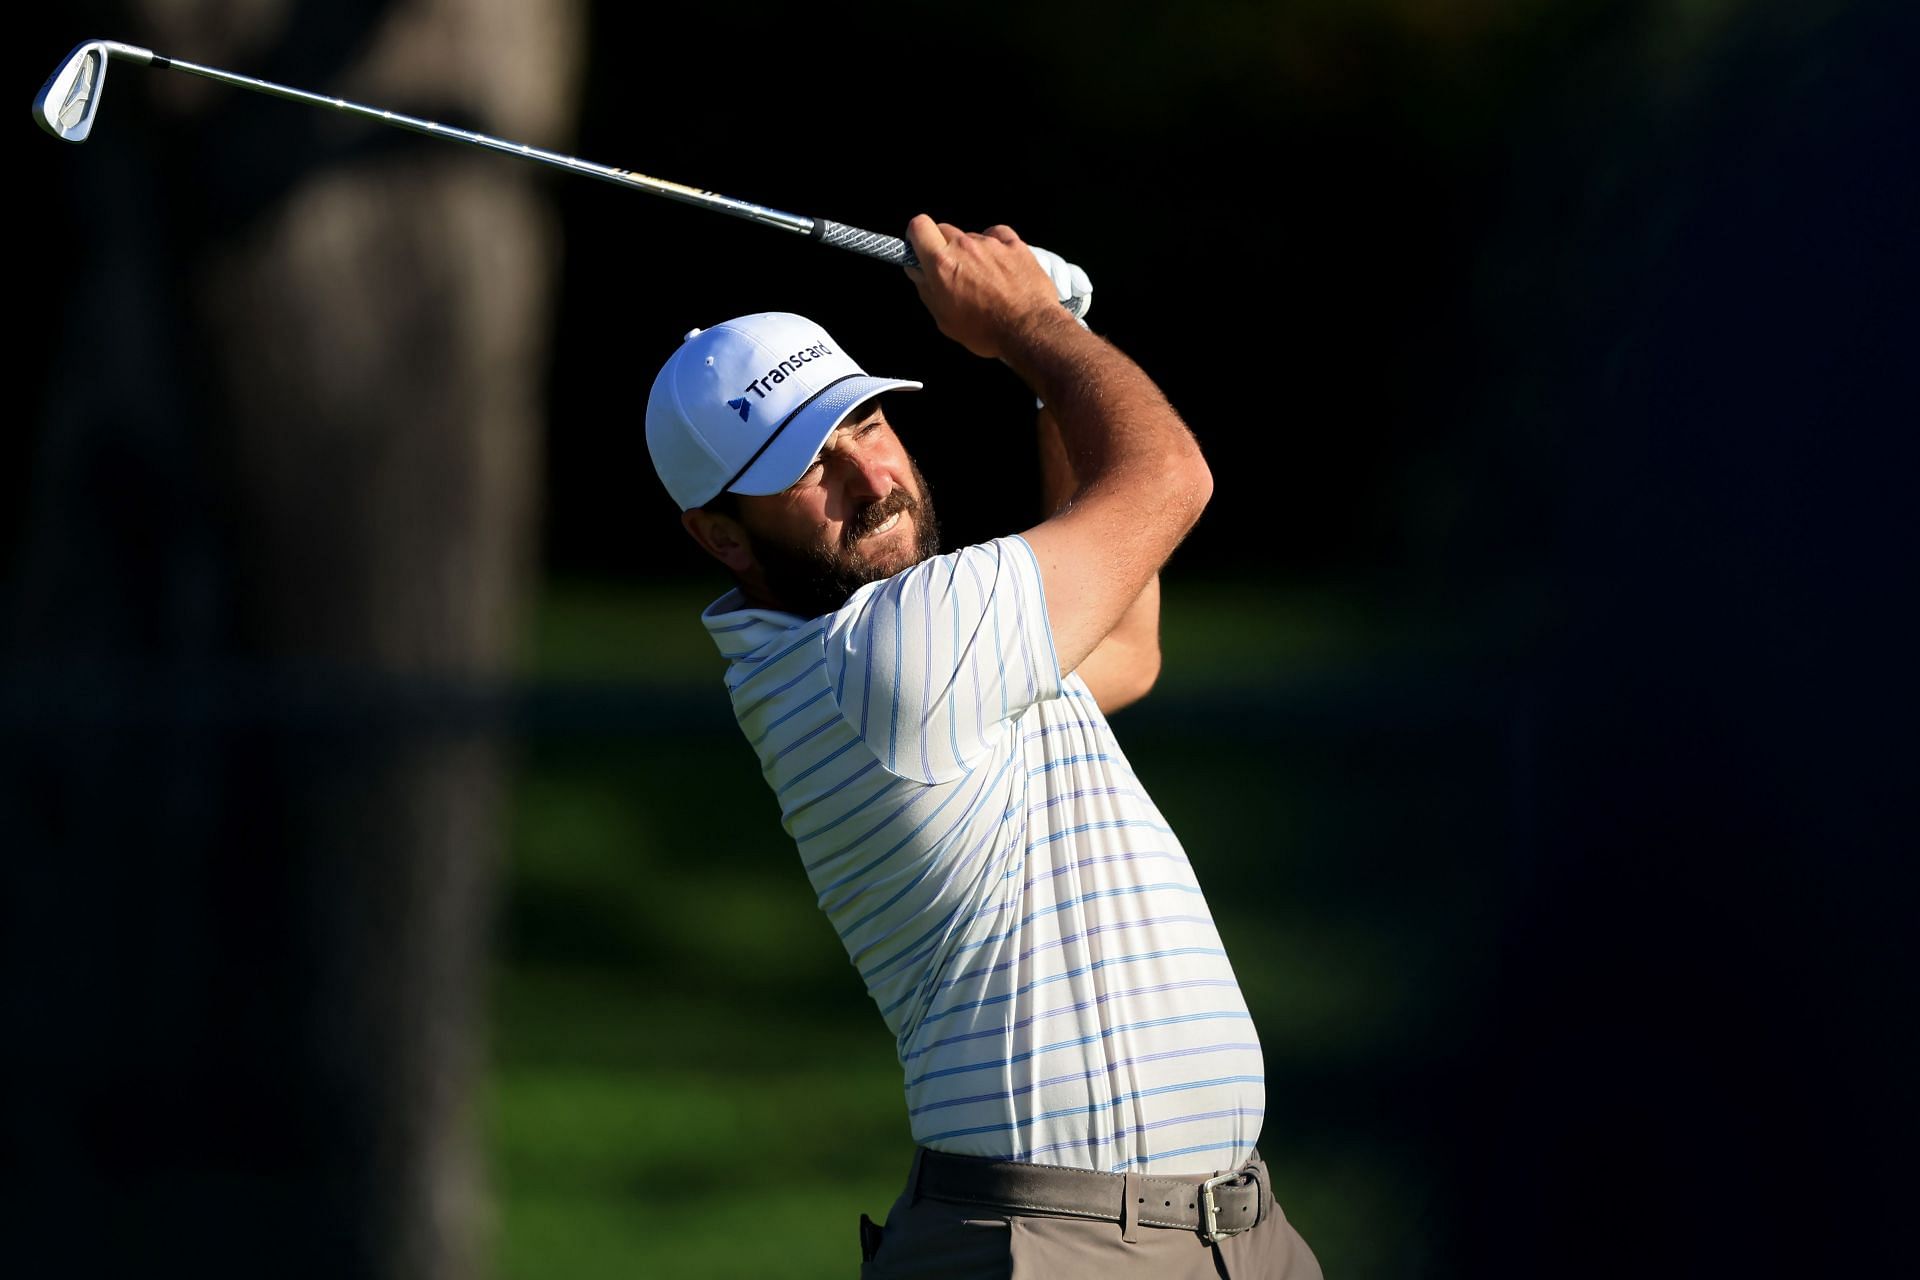 Stephan Jaeger leads at the Farmers Insurance Open after third round